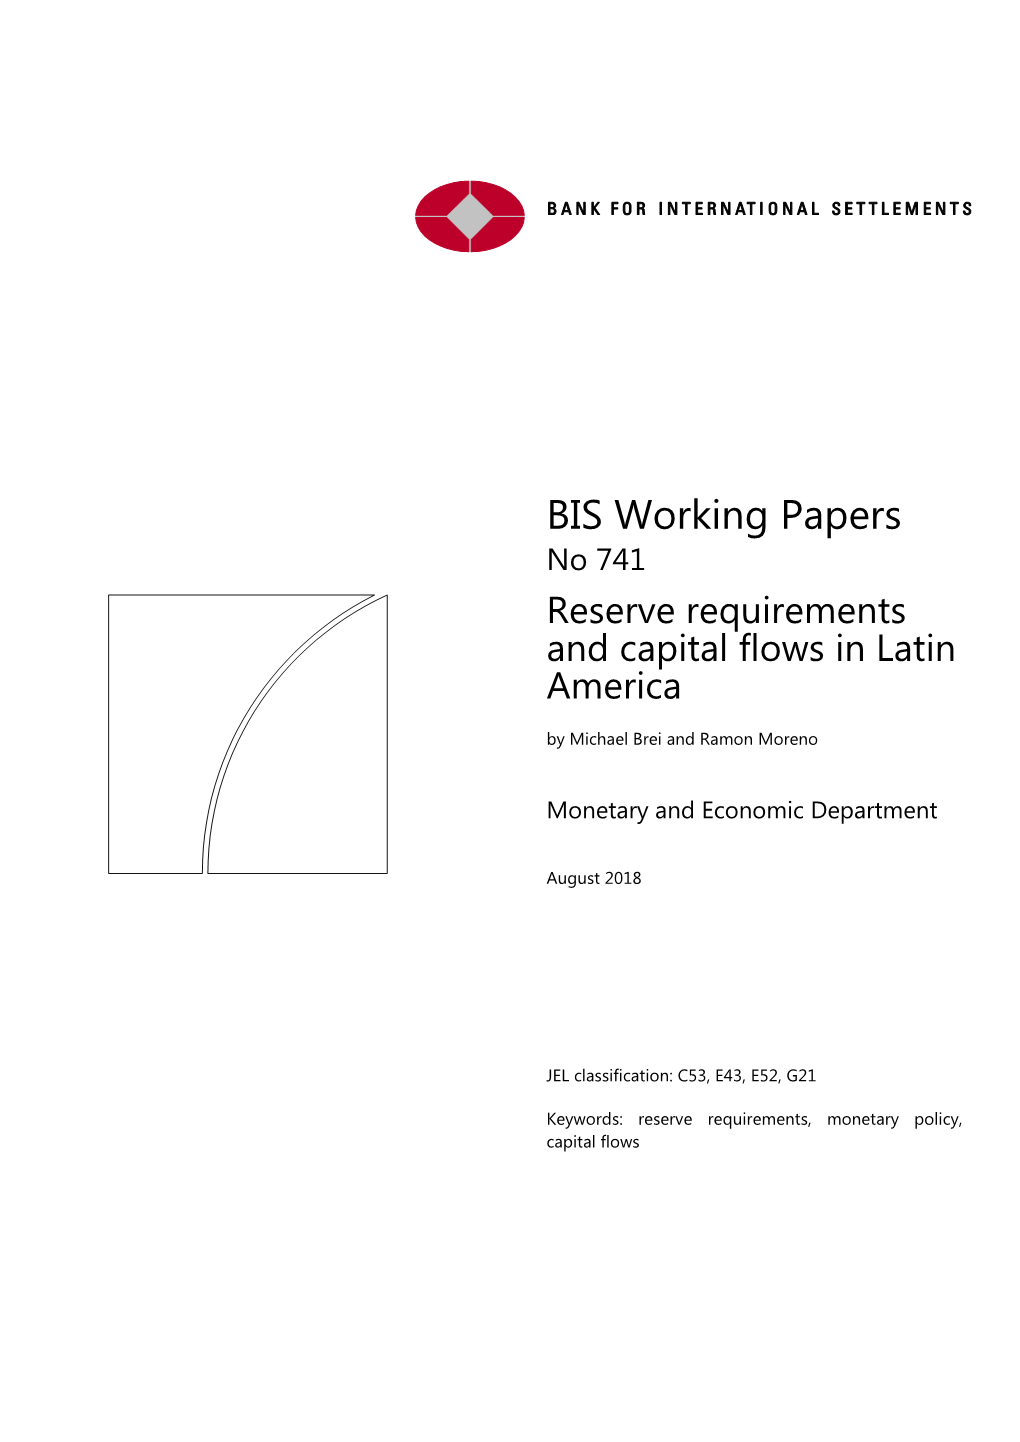 Reserve Requirements and Capital Flows in Latin America by Michael Brei and Ramon Moreno